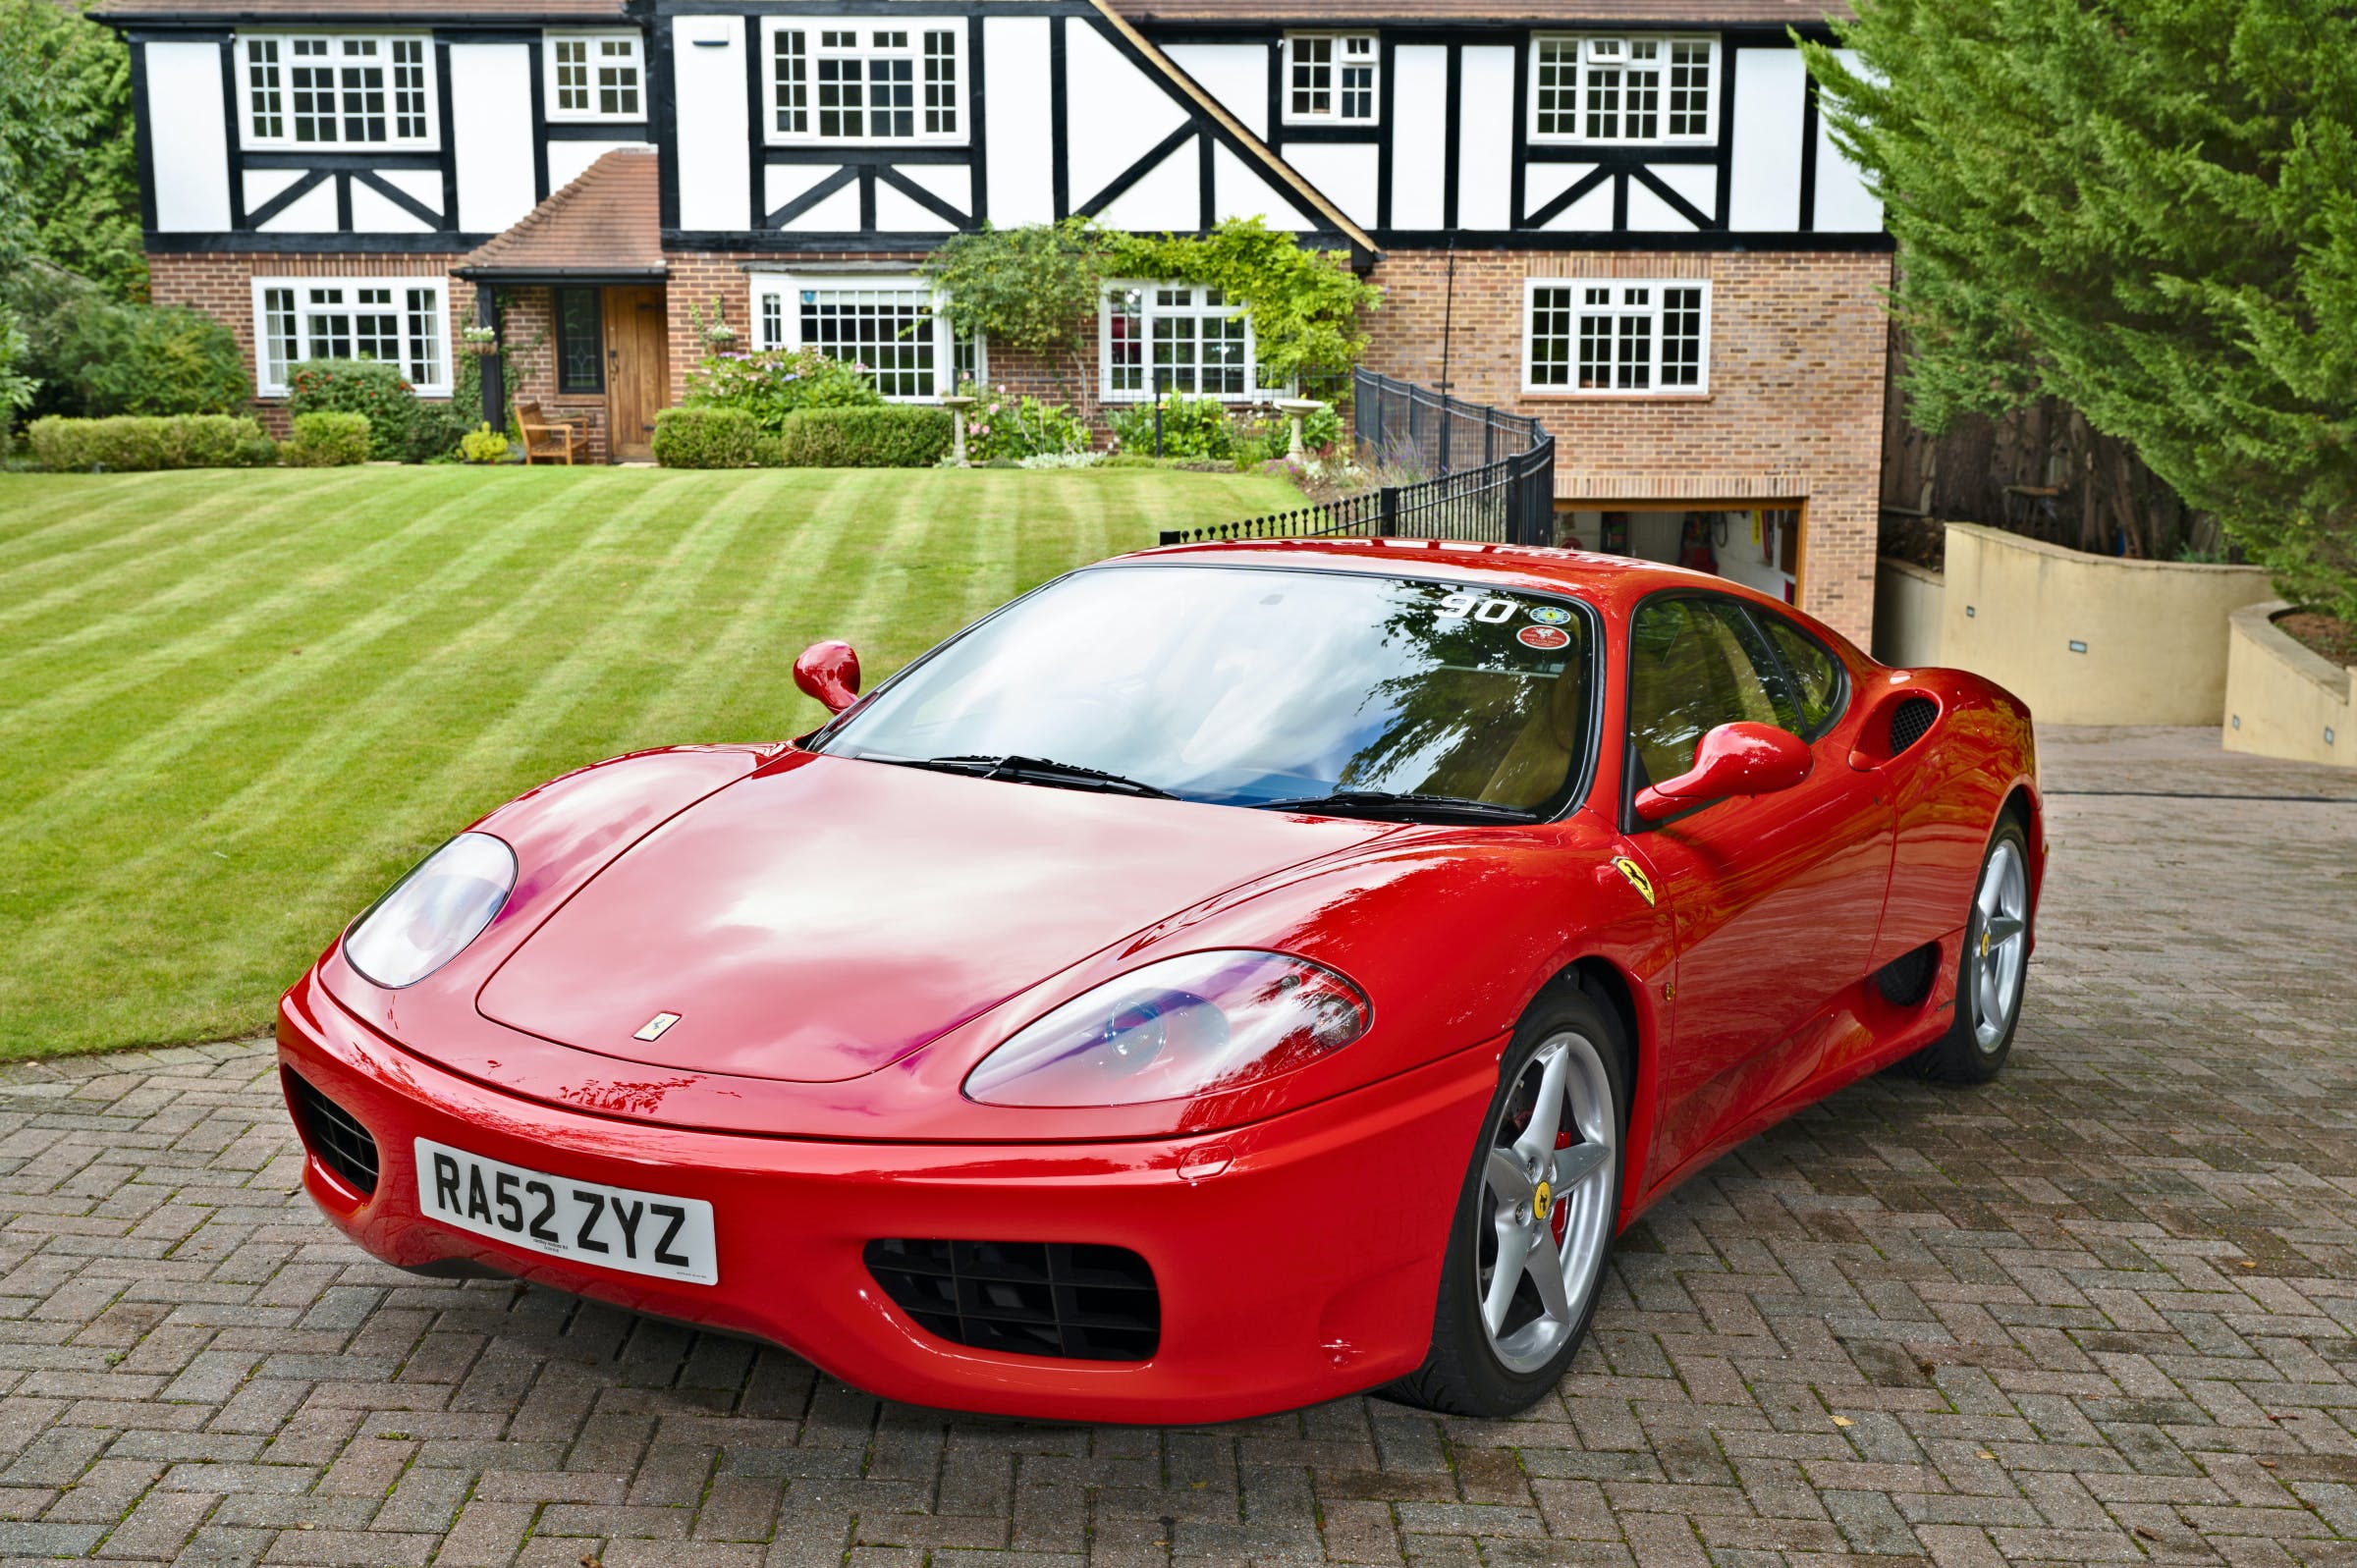 Quick, quick, Slowhand: Eric Clapton's Ferrari 360 Modena is for sale